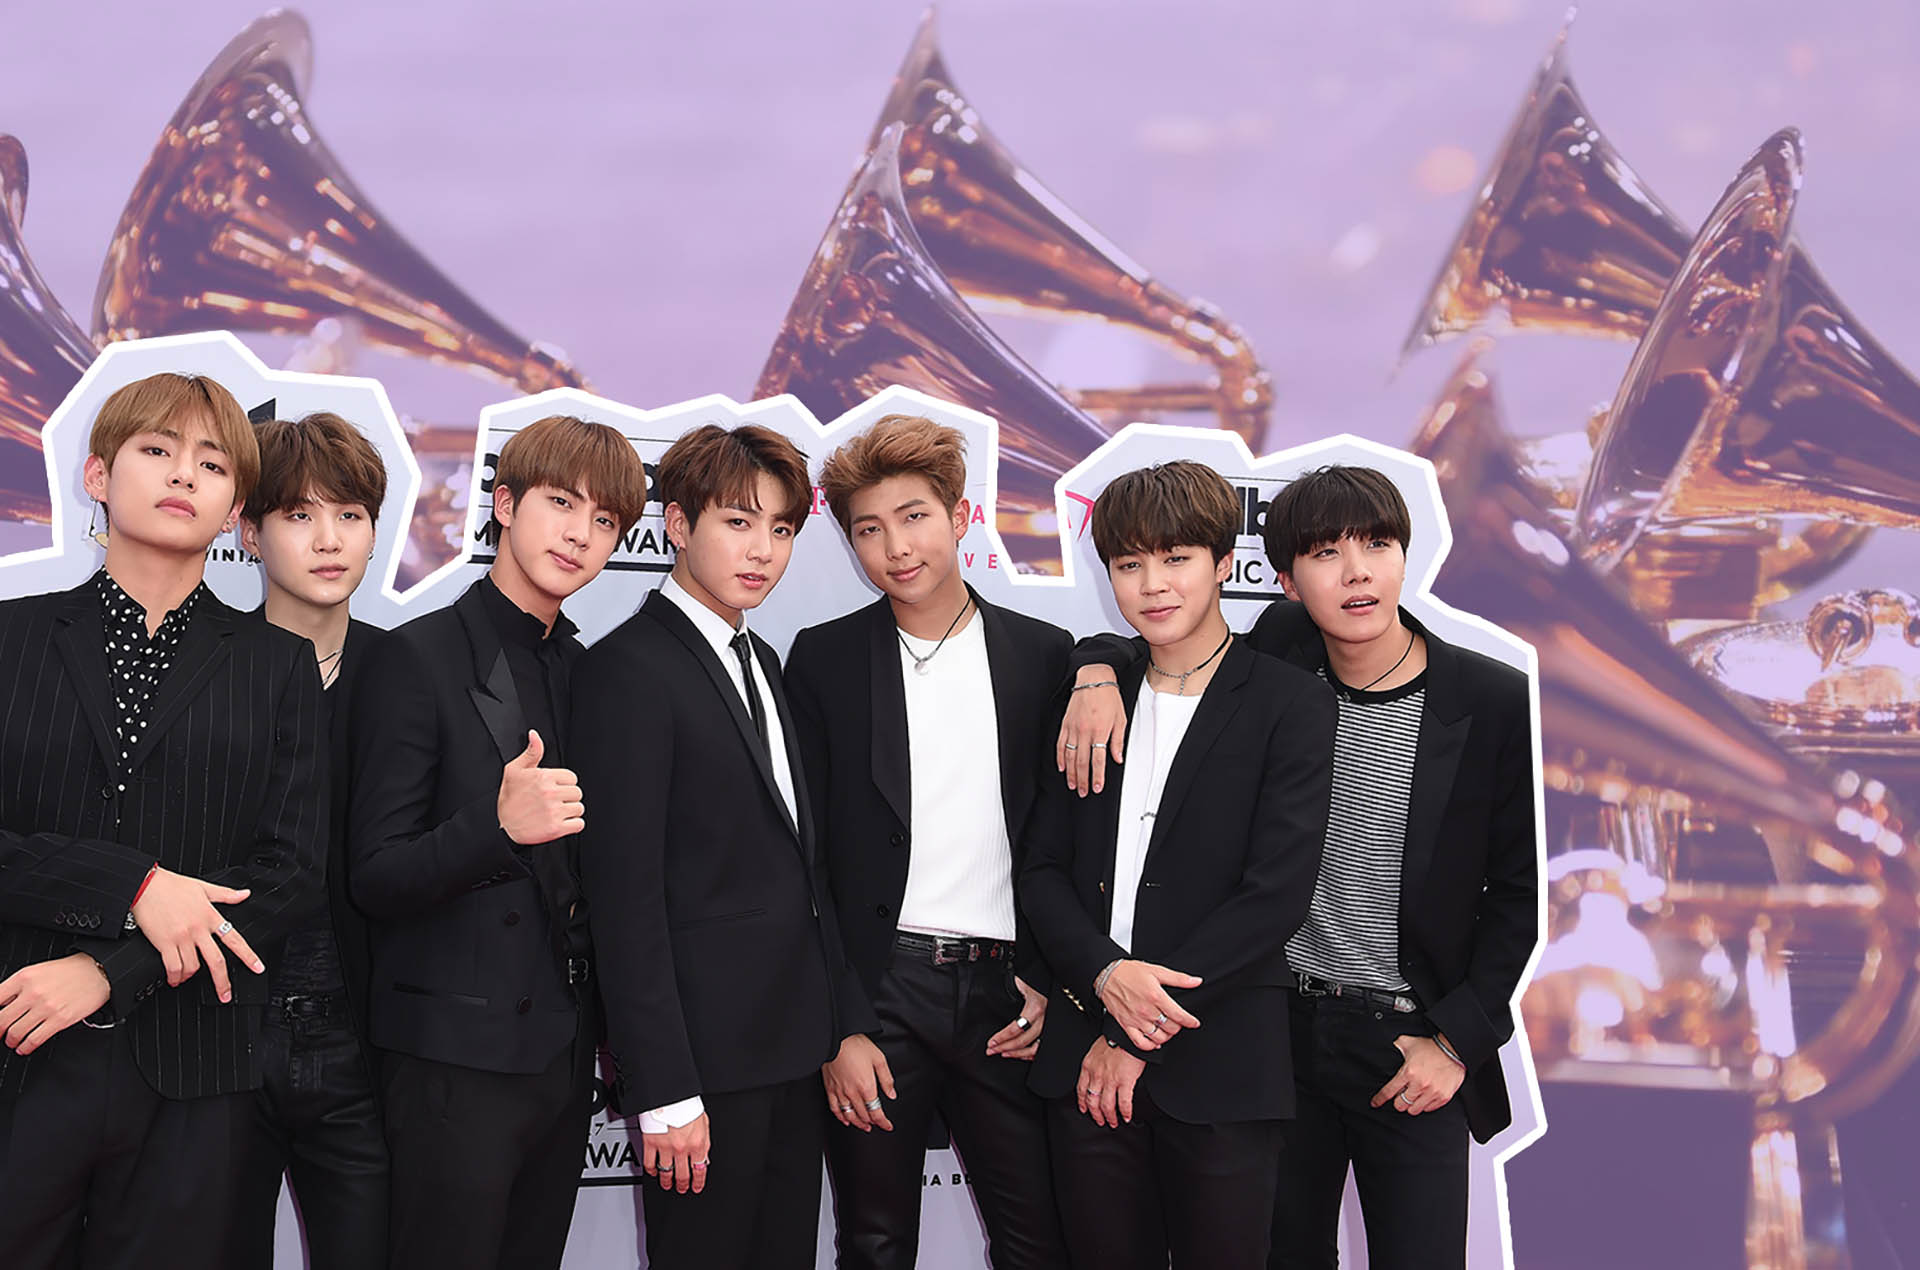 BTS nominated Grammys 2019 for the first time!